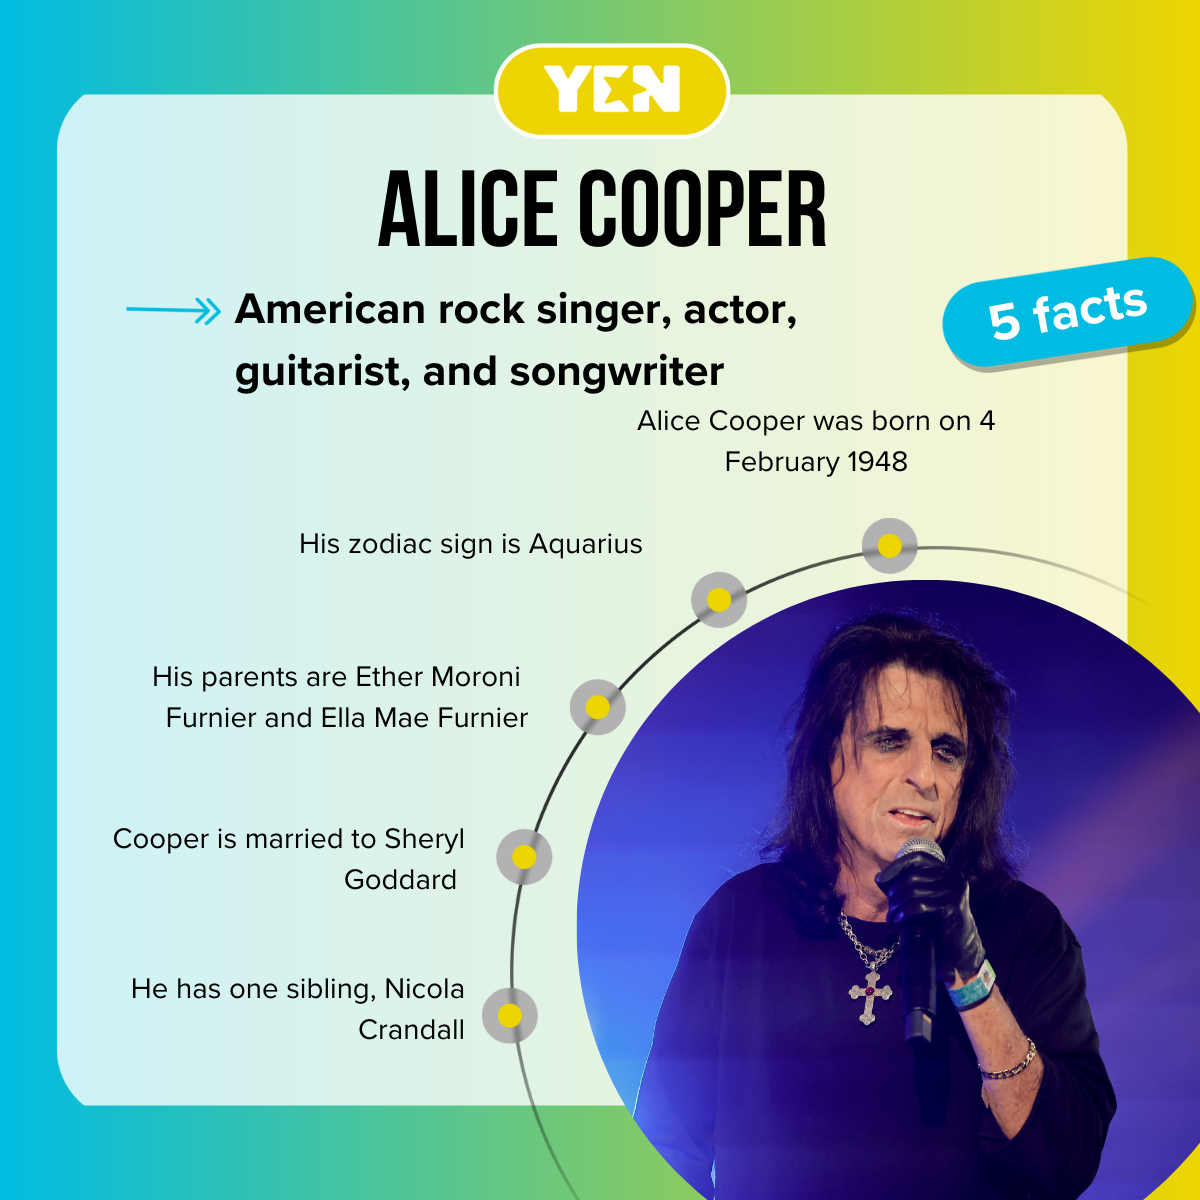 Facts about Alice Cooper